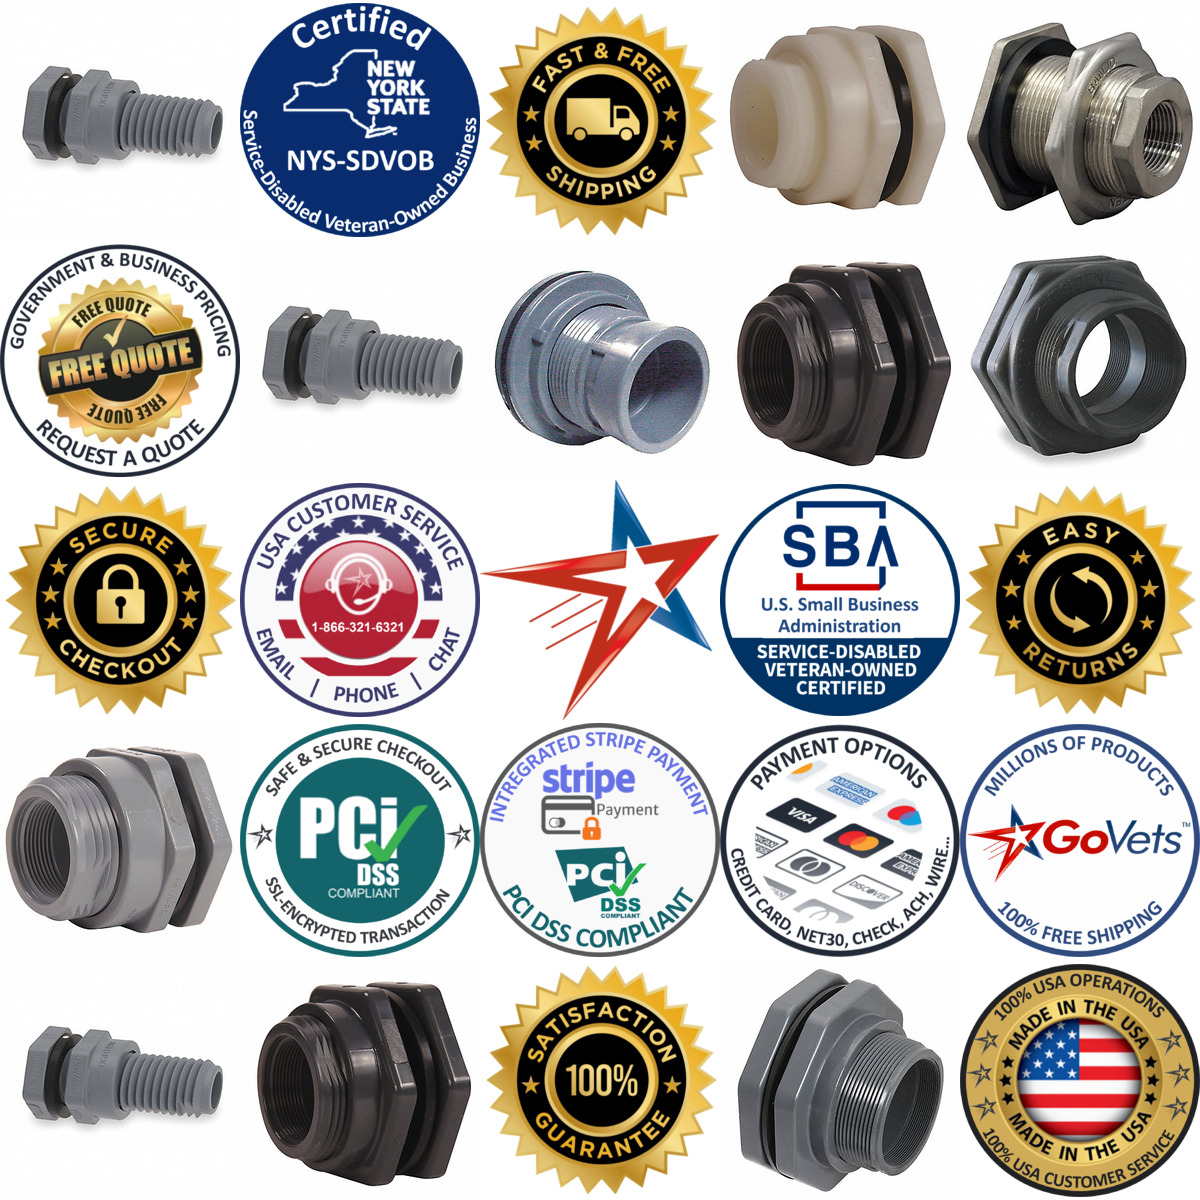 A selection of Bulkhead Tank Fittings products on GoVets